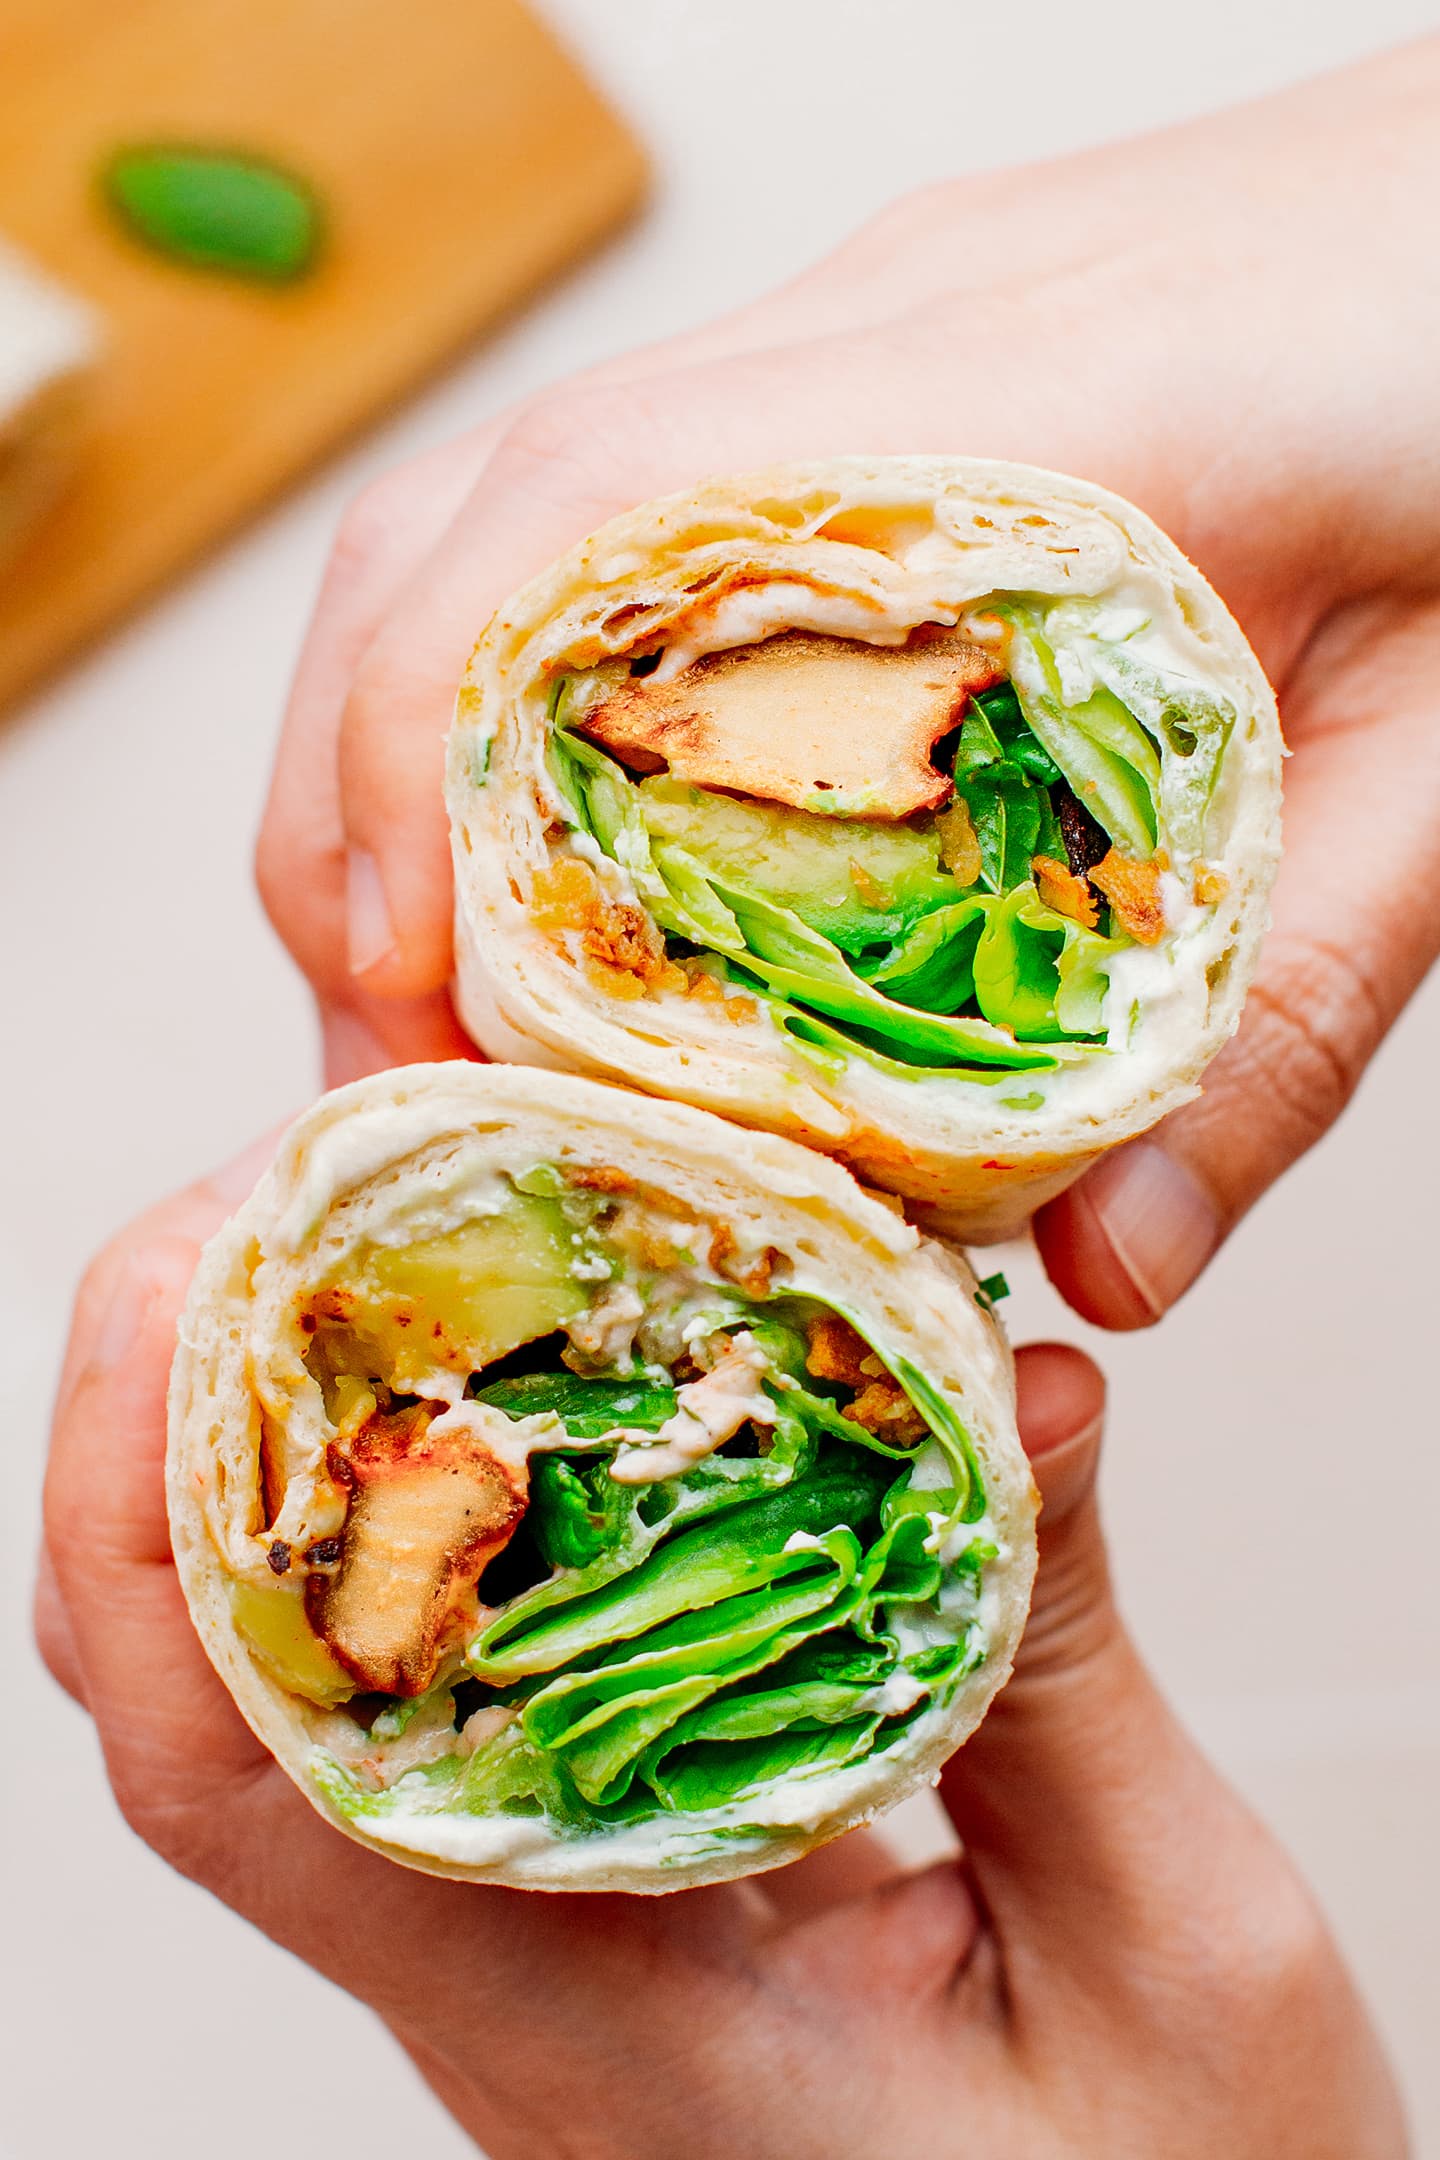 Holding two wraps with vegan chicken, lettuce, and avocado.